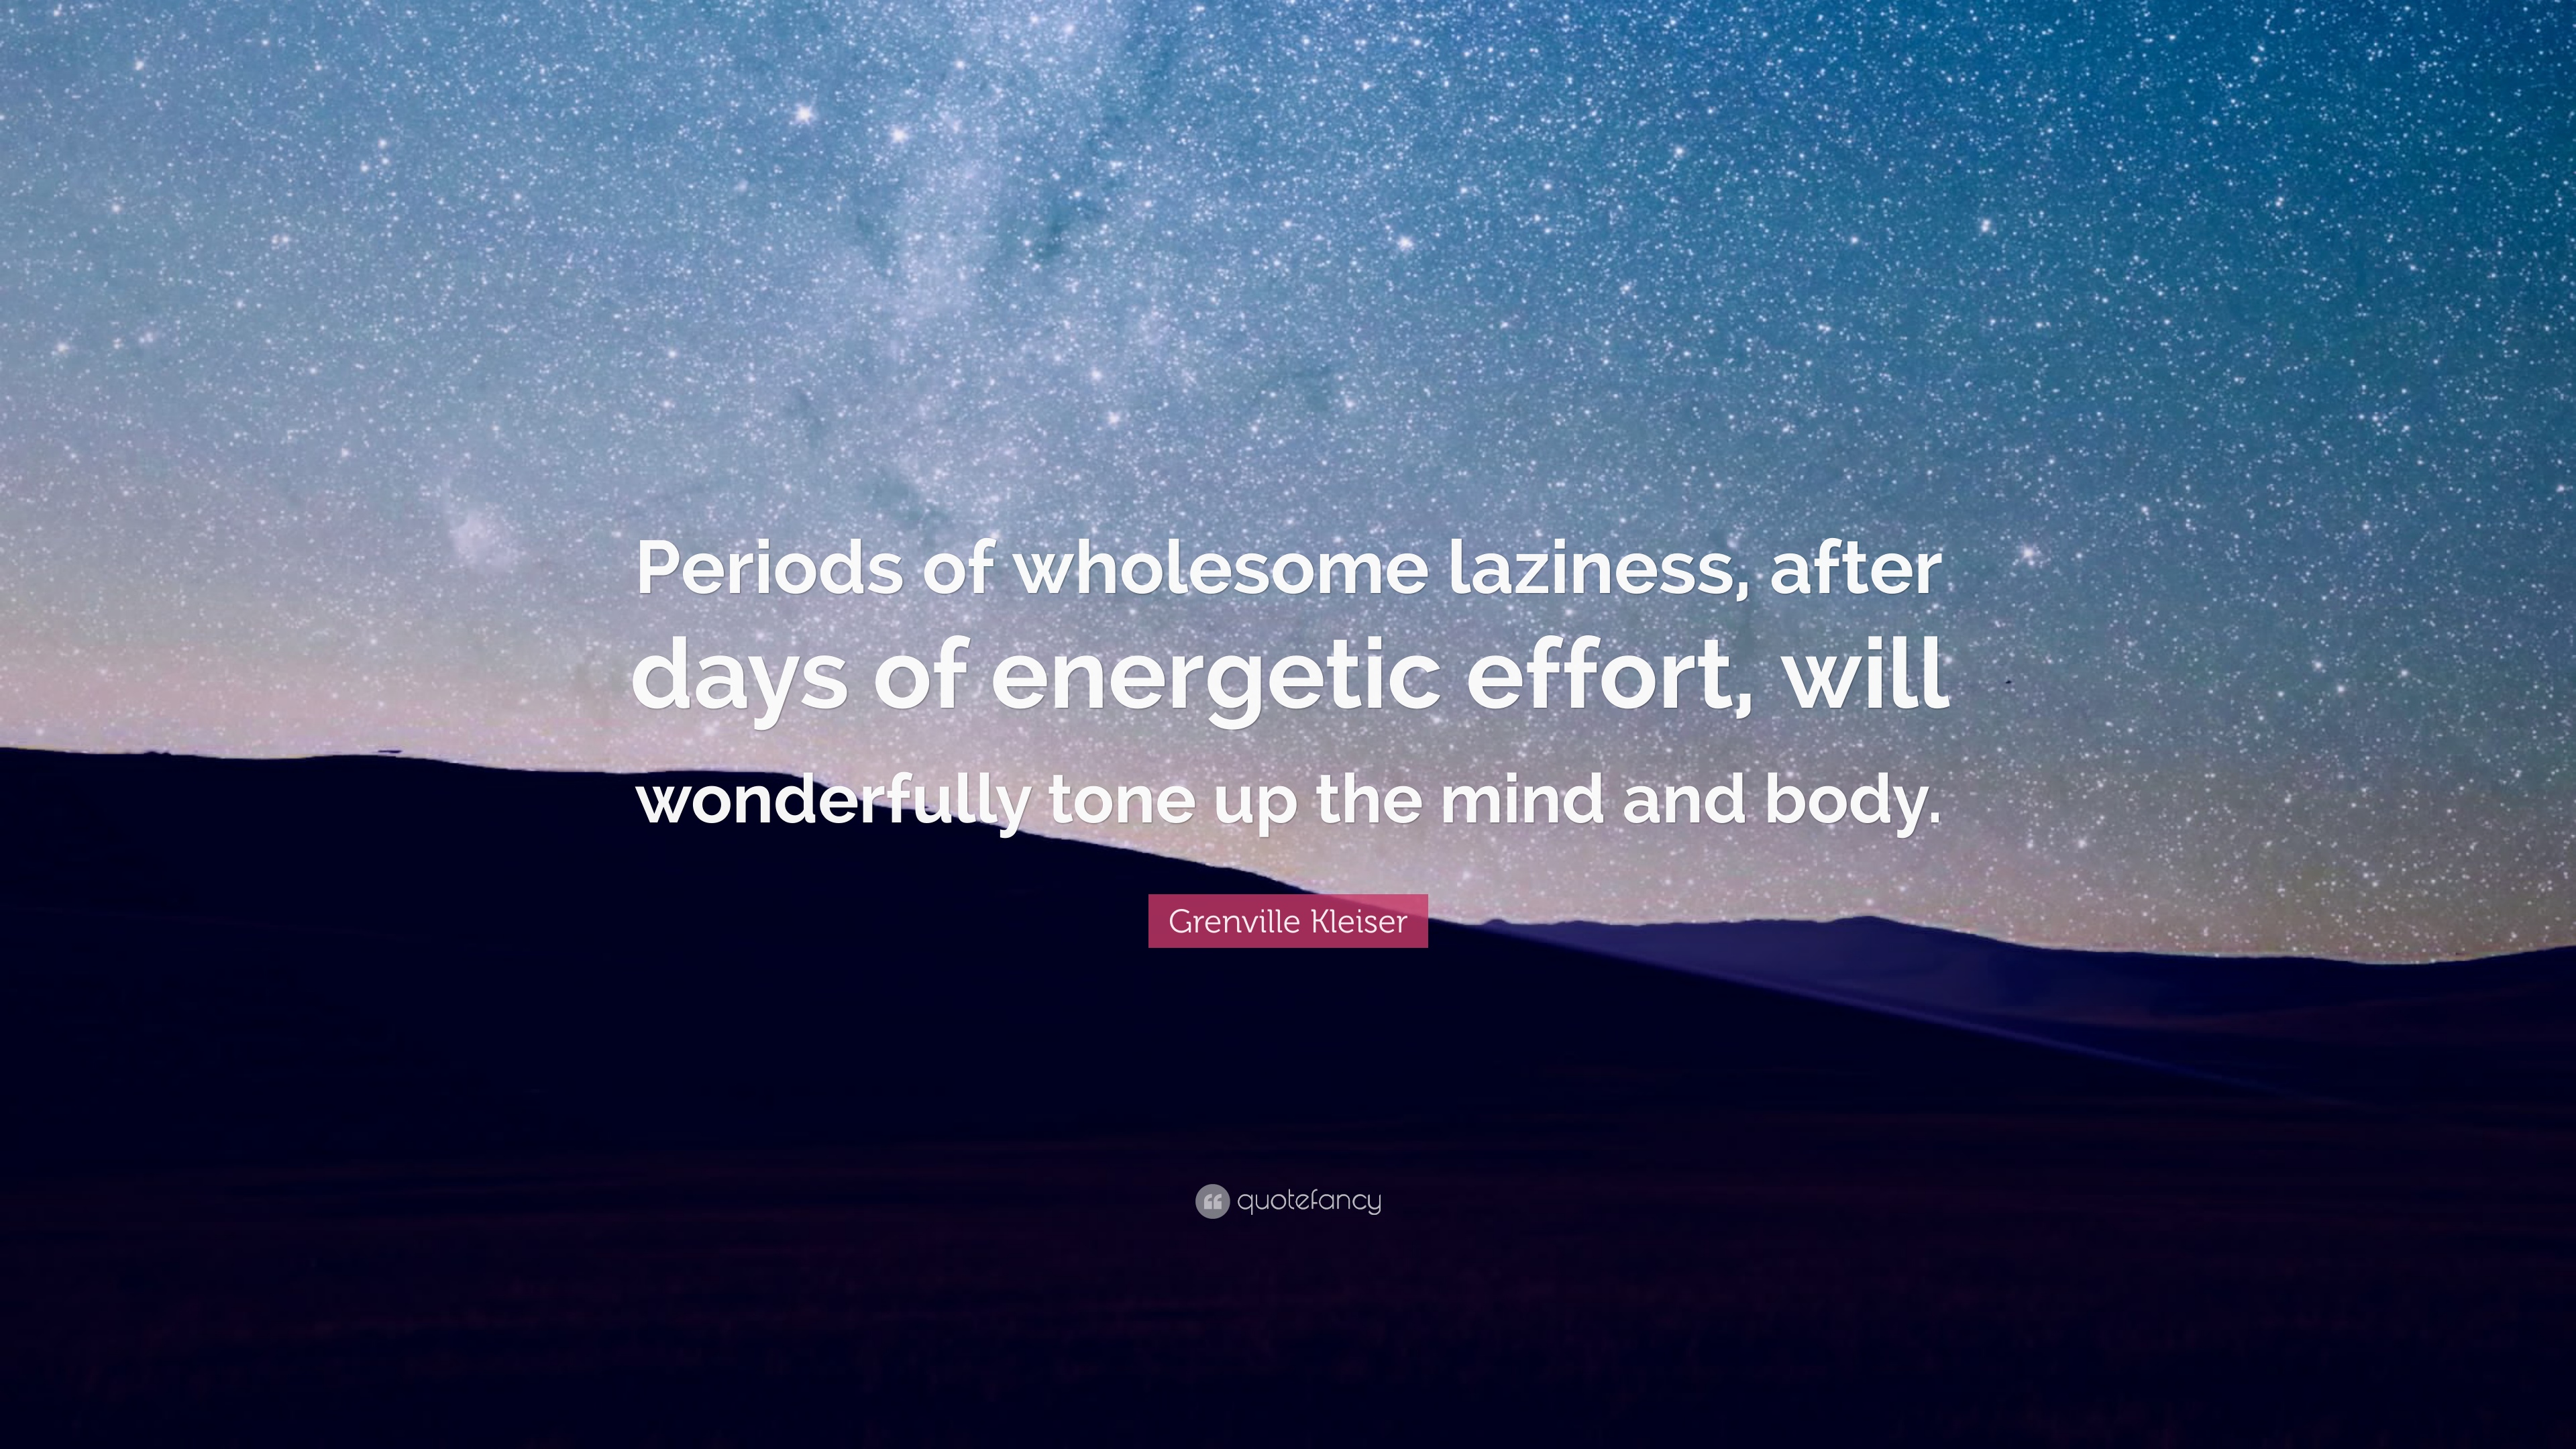 Grenville Kleiser Quote: “Periods of wholesome laziness